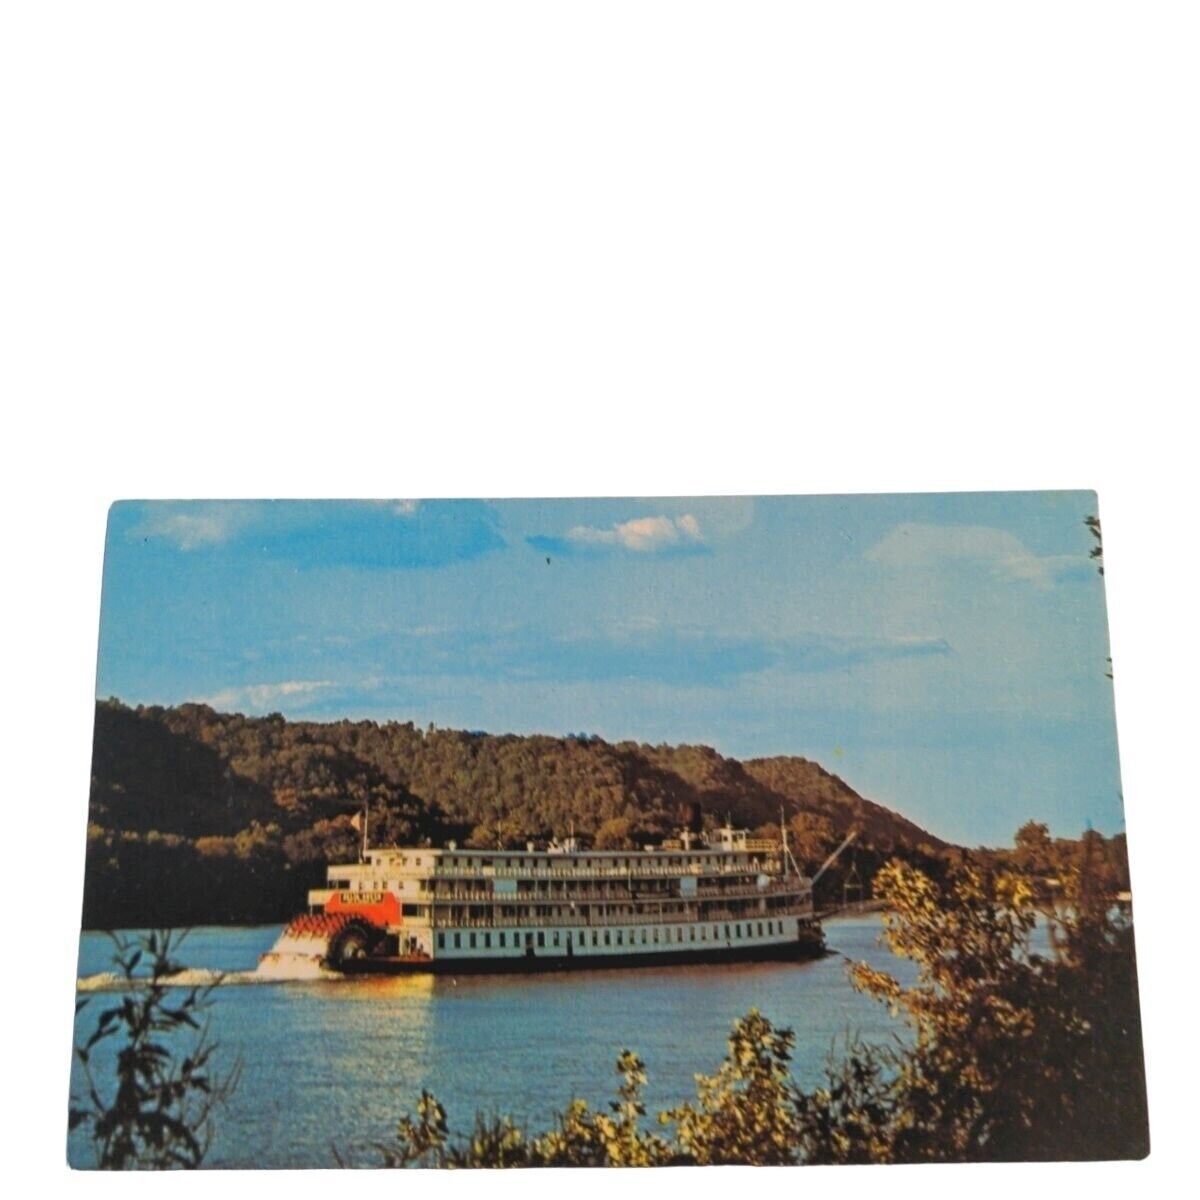 Primary image for Postcard Steamboat Delta Queen Madison Indiana Mississippi Chrome Unposted